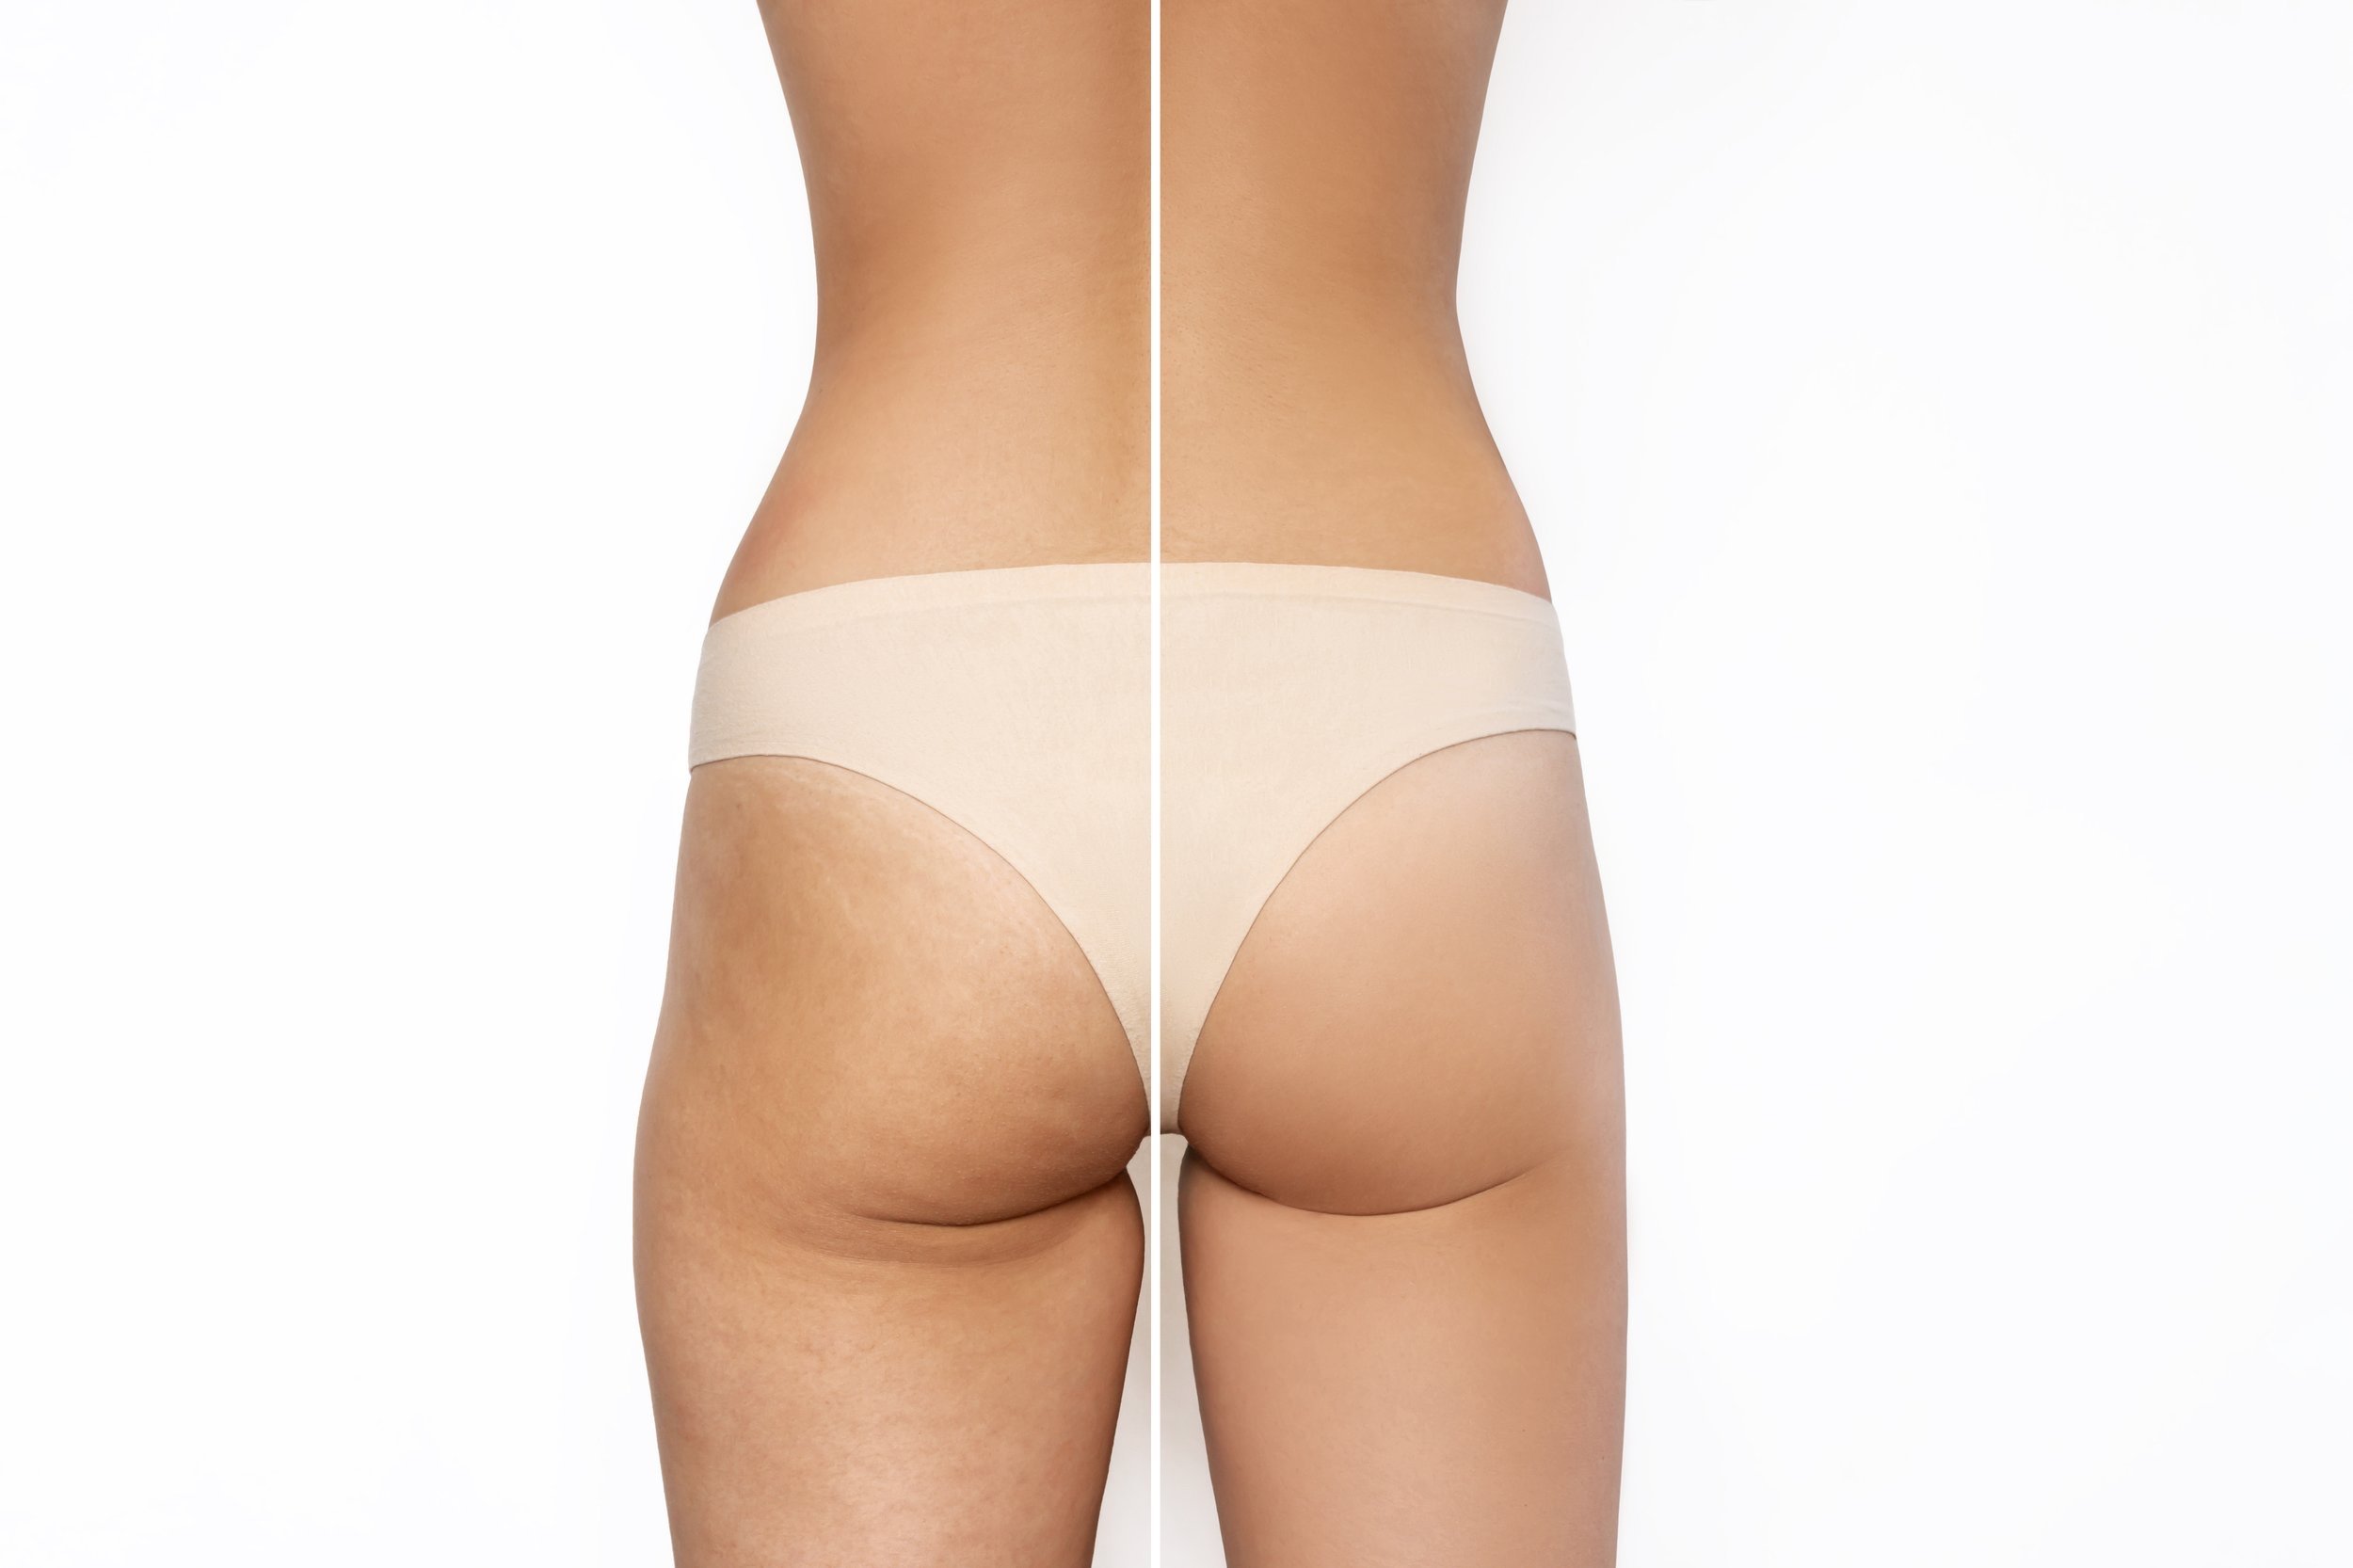 female-buttocks-before-after-liposuction-anticellulite-treatment-healthy-nutrition-training.jpg